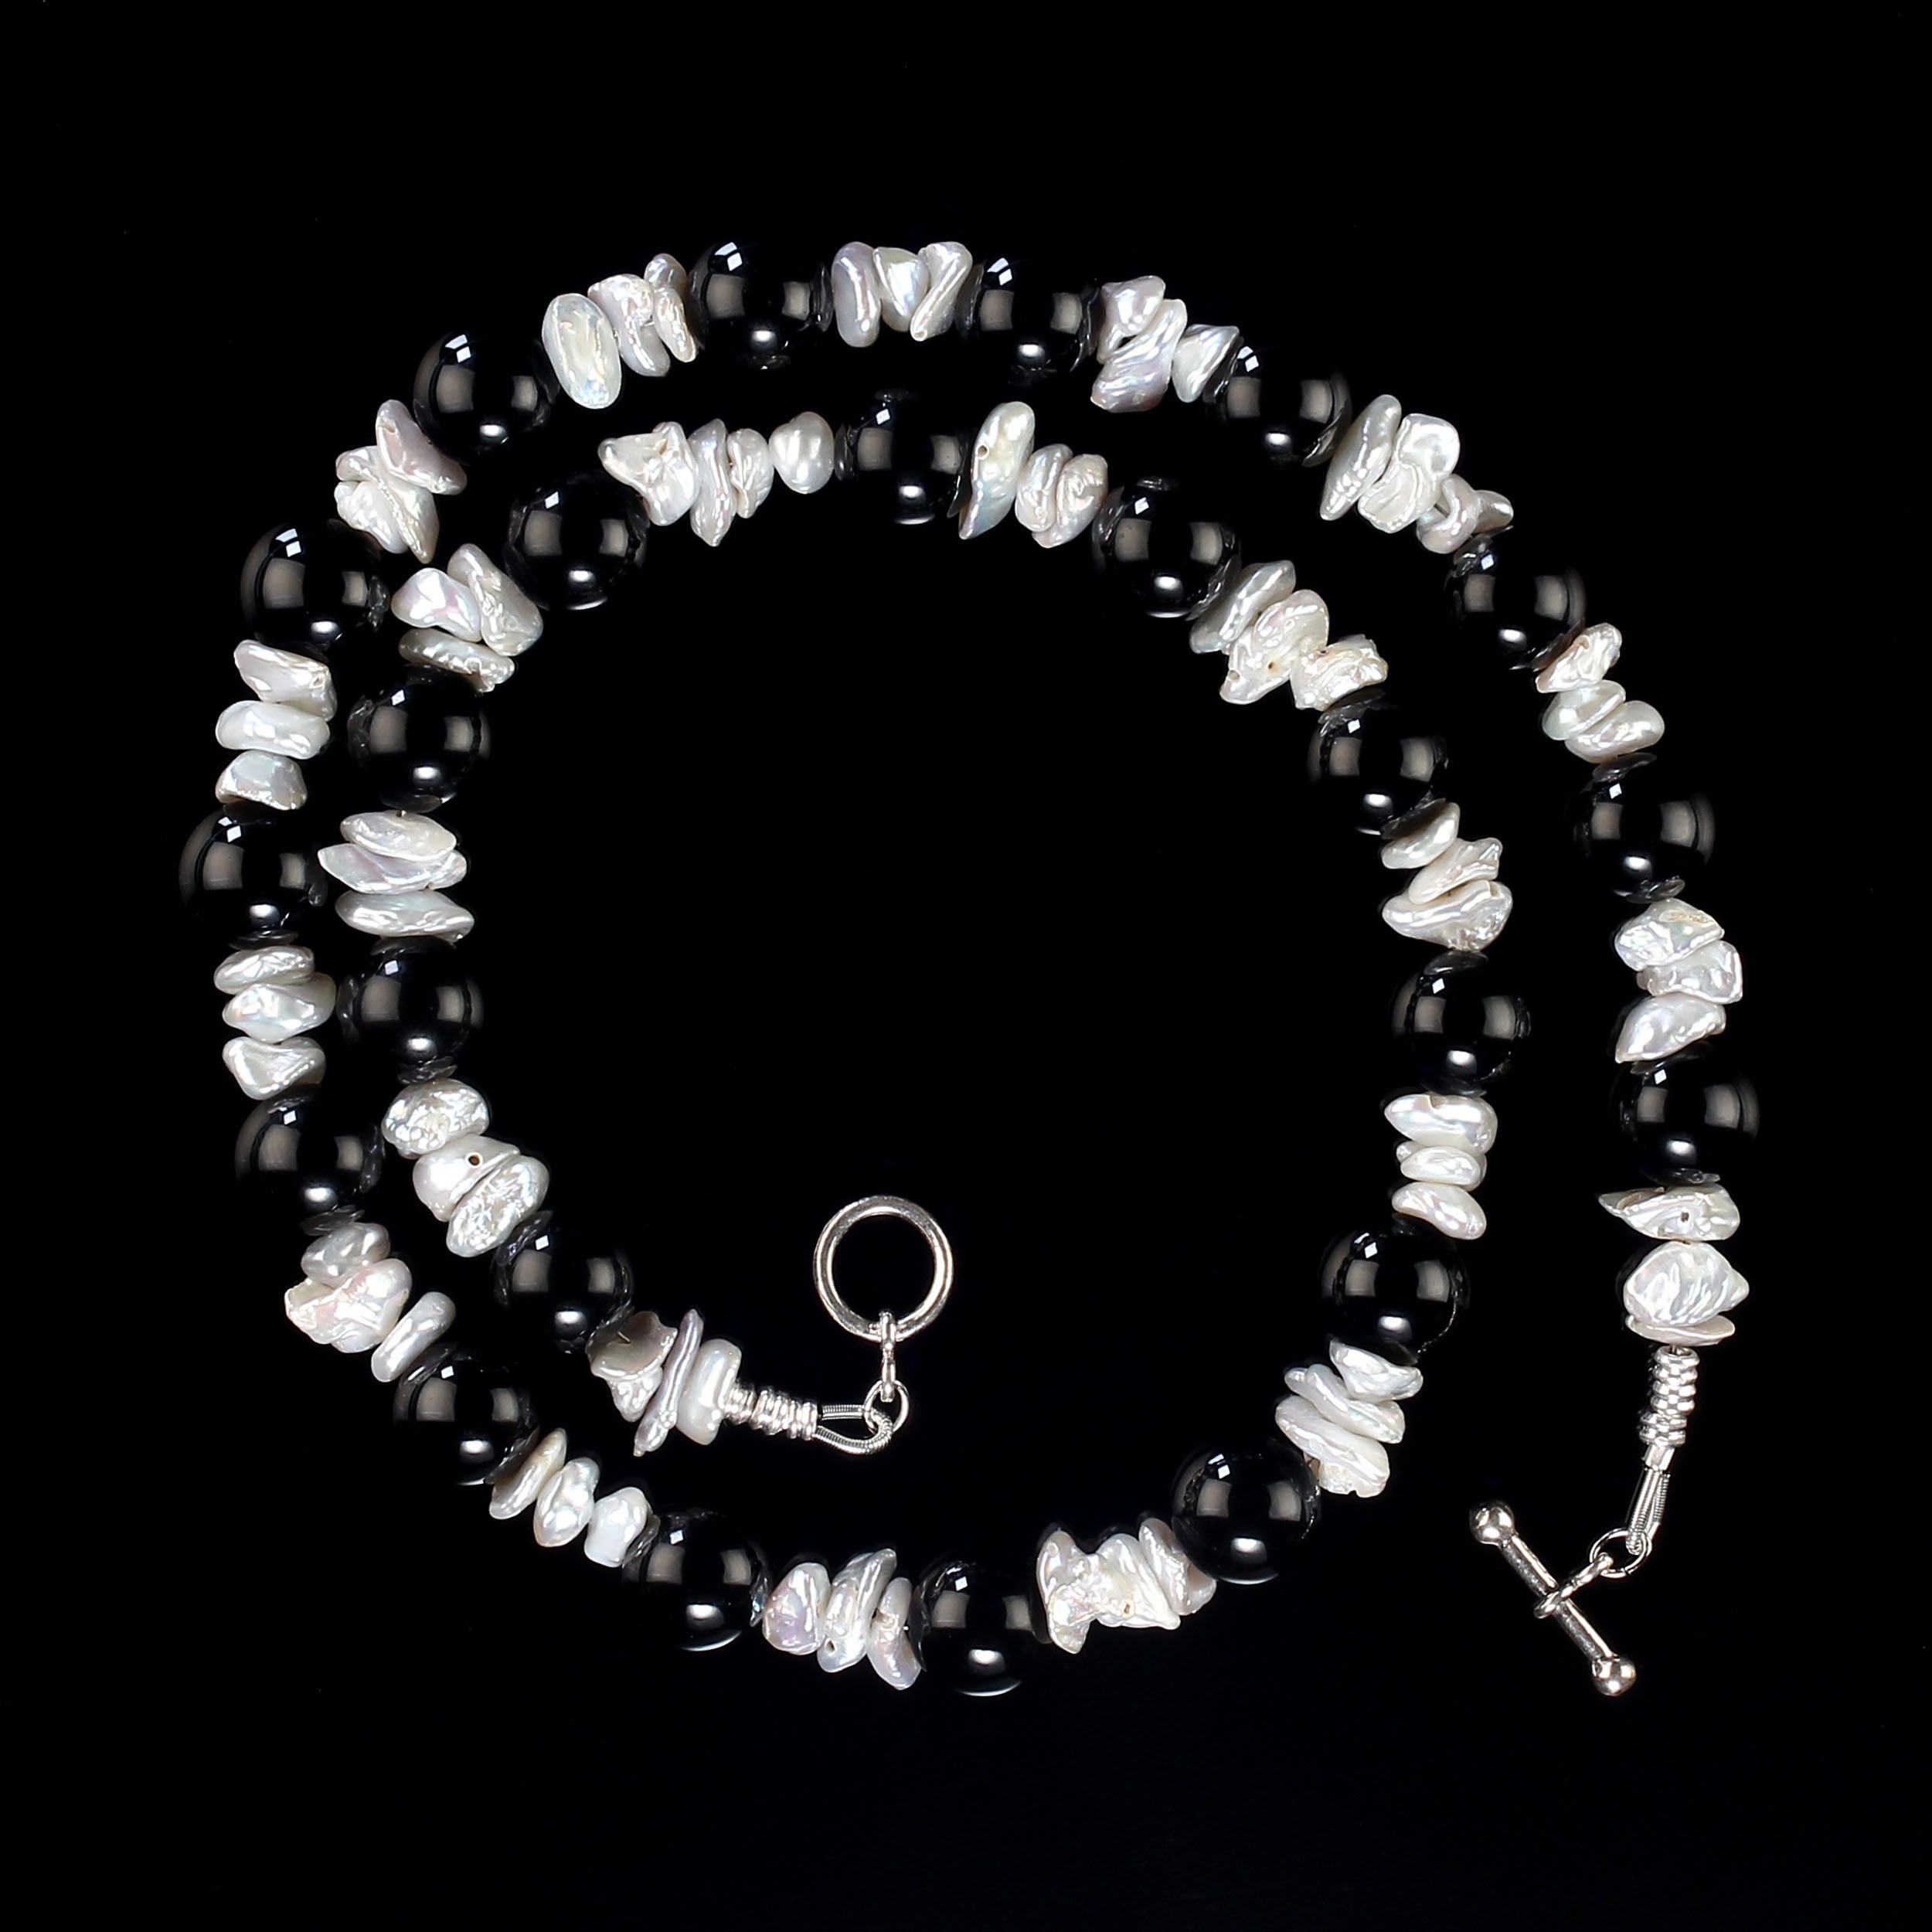 AJD 20 Inch Gray Iridescent Biwa Pearl and Black Onyx necklace Great Gift! For Sale